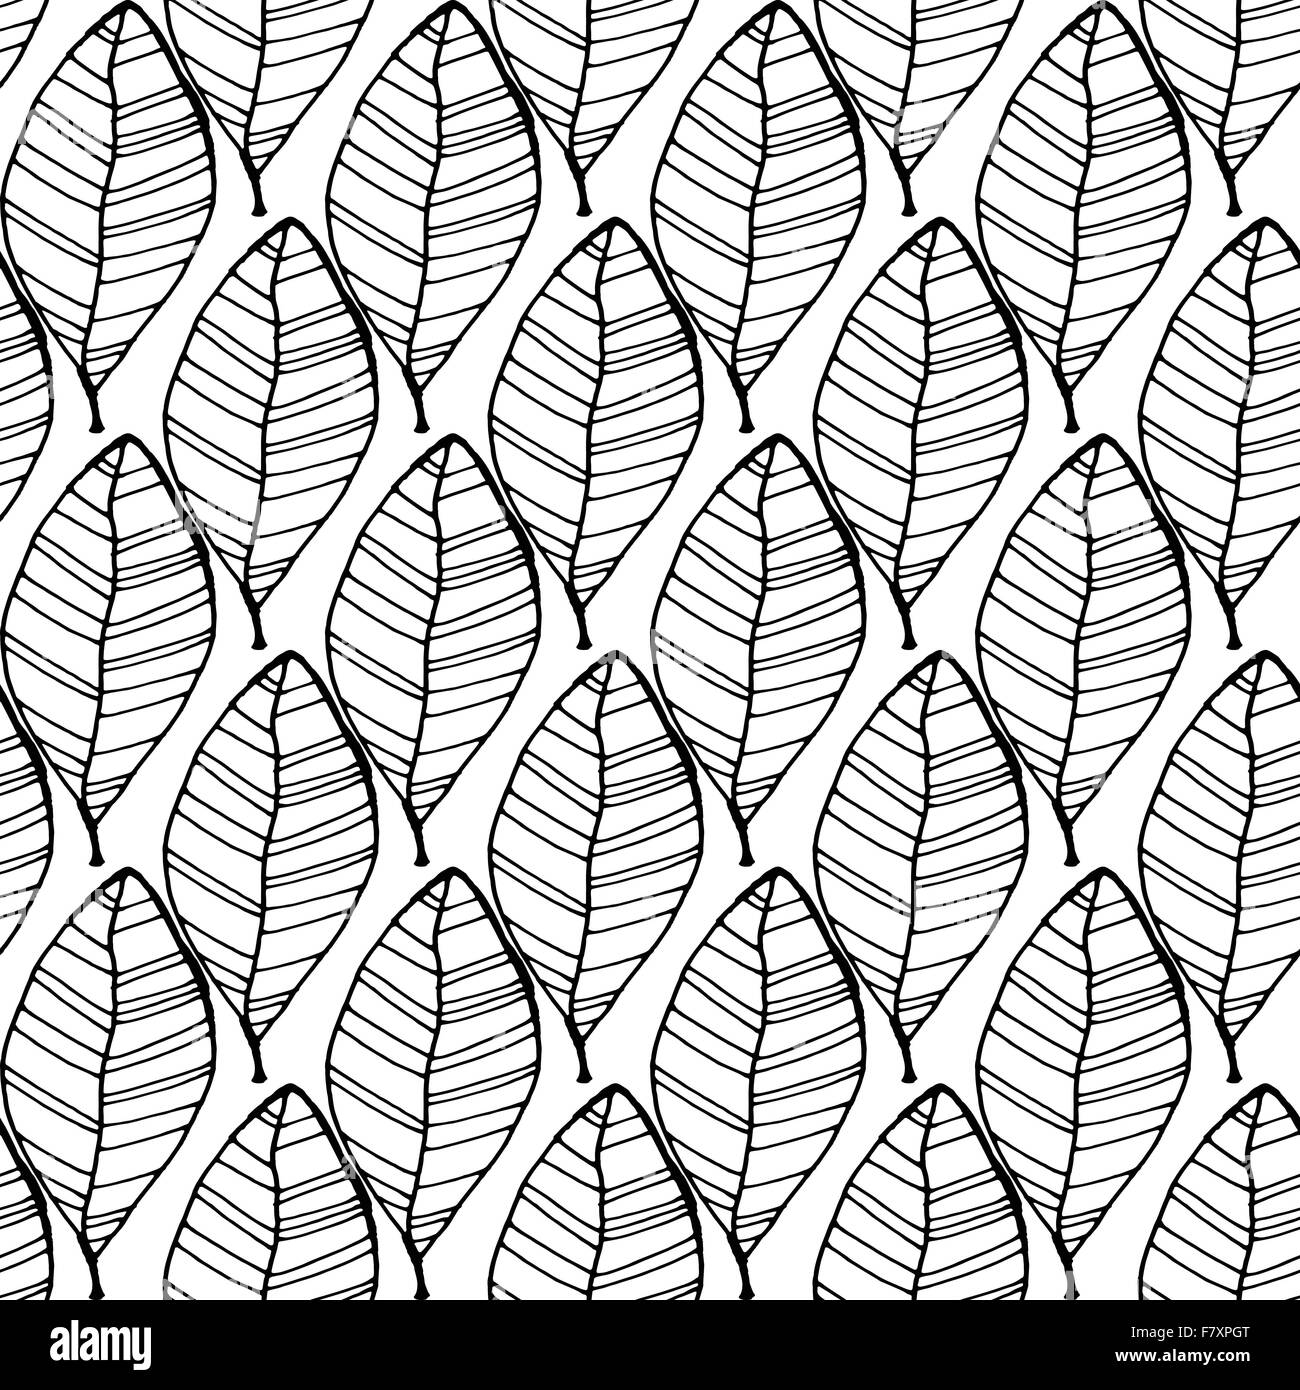 Vintage abstract autumn seamless leaves pattern Stock Vector